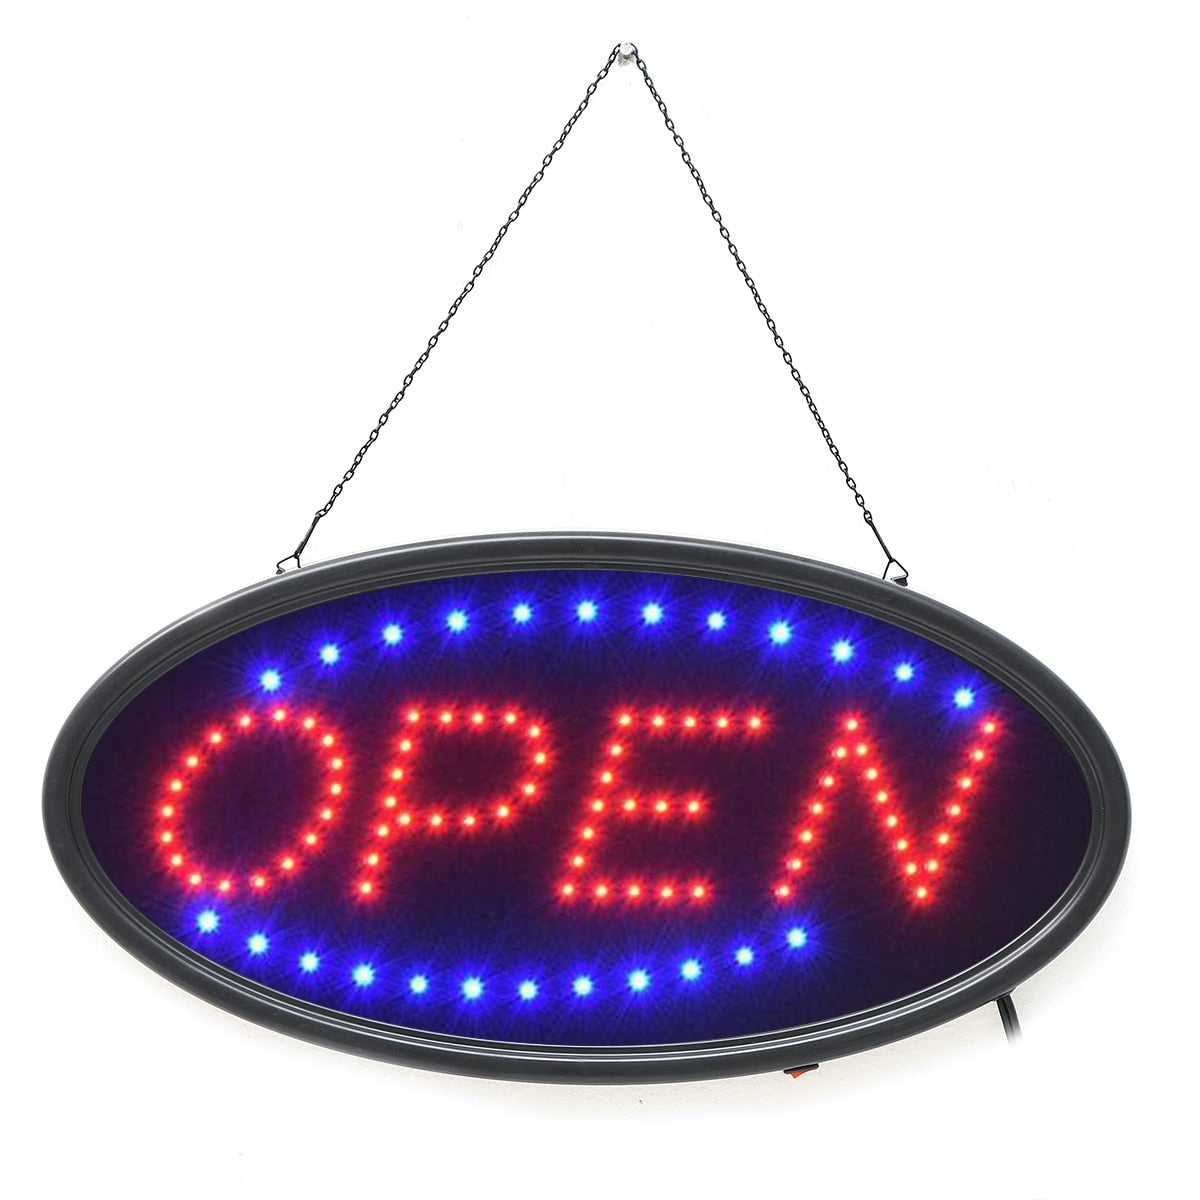 "OPEN" LED sign, custom options available upon request.